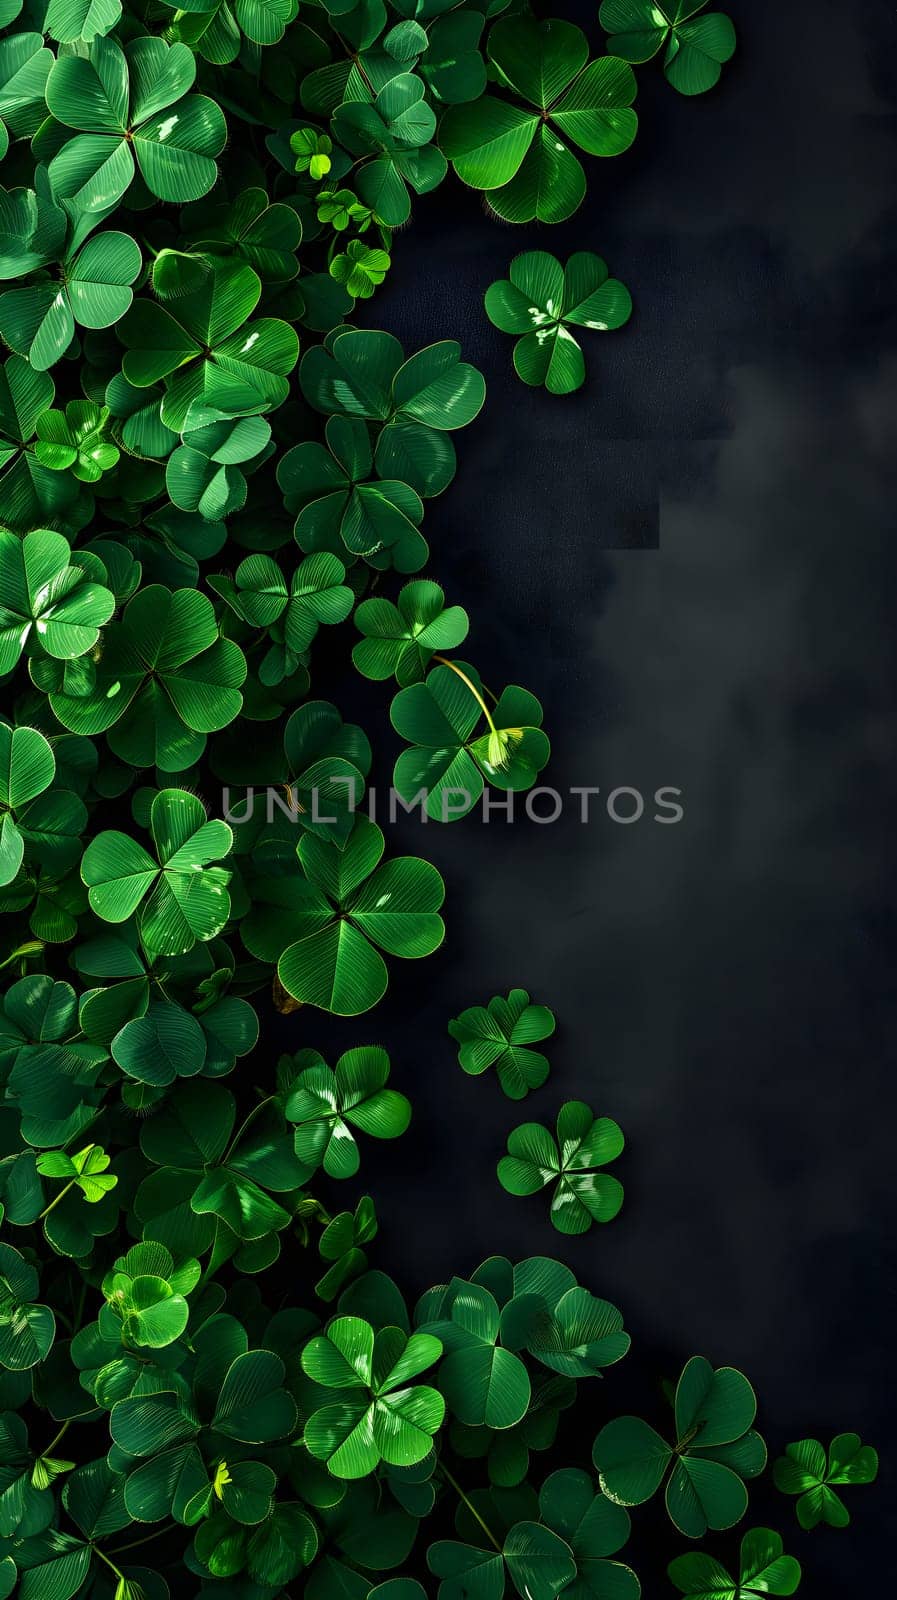 Clover with black background for St. Patricks day. Neural network generated image. Not based on any actual scene or pattern.